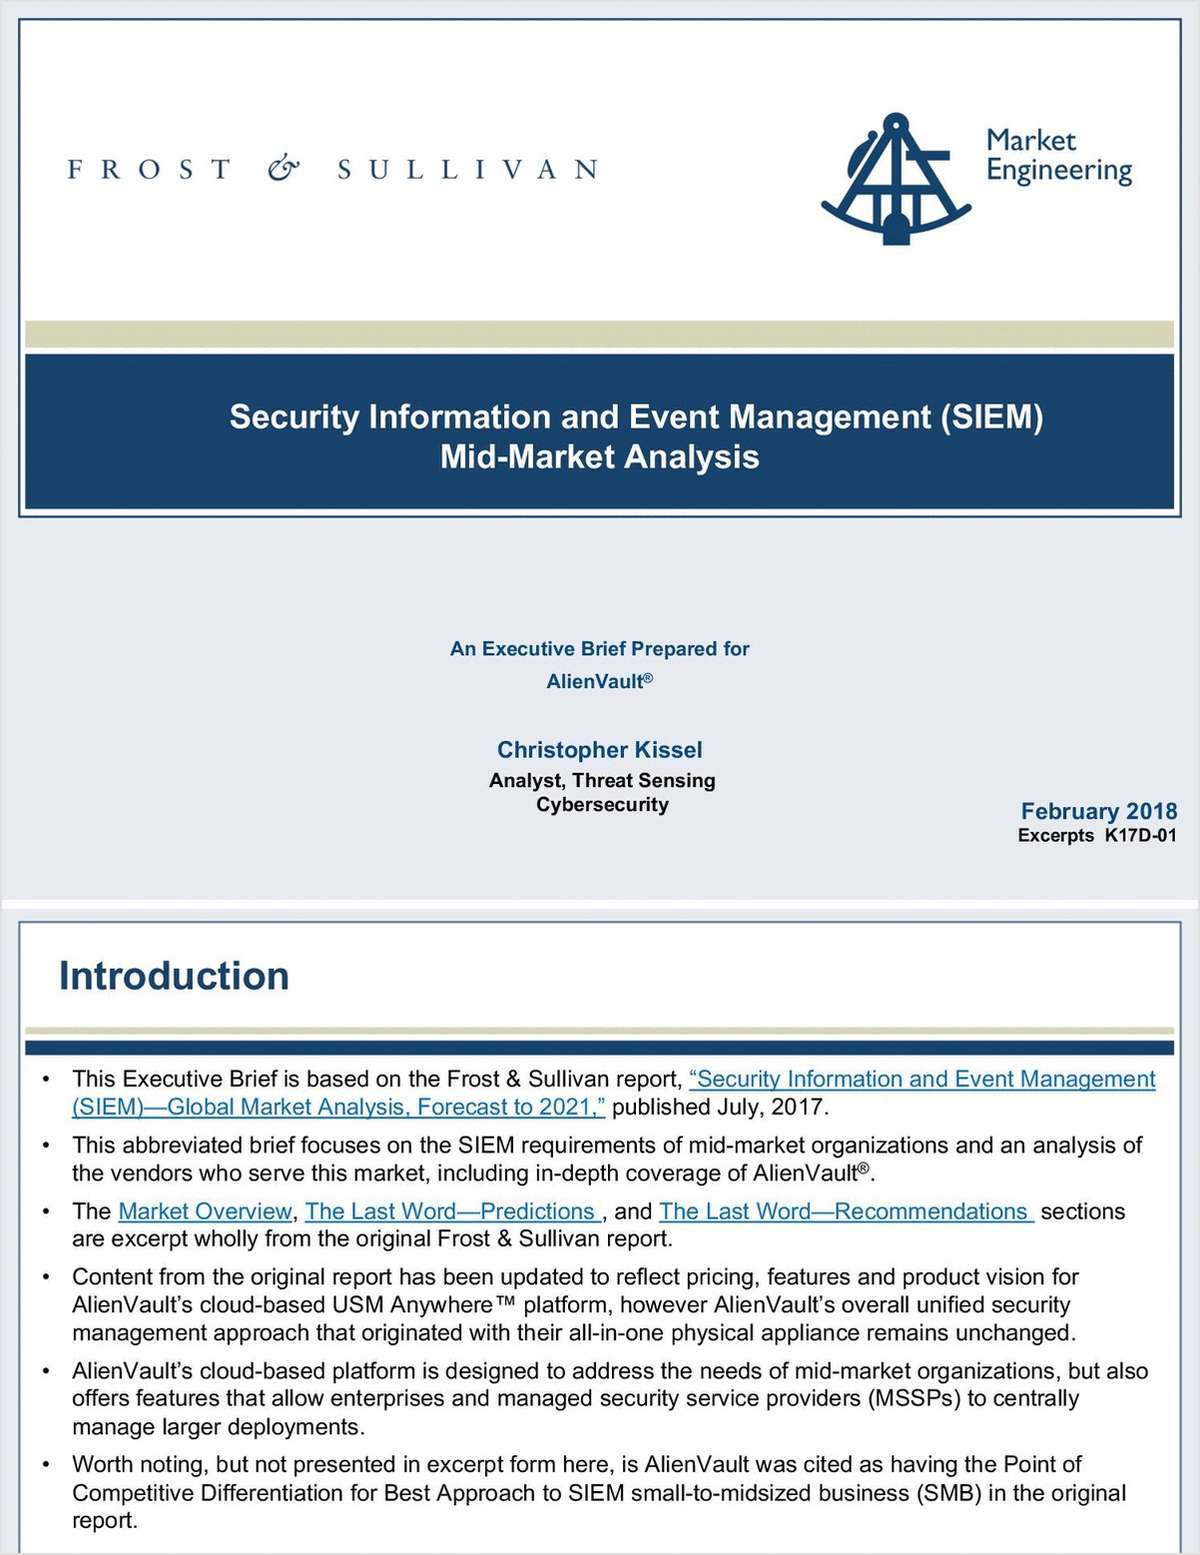 Frost & Sullivan: Security Information and Event Management (SIEM) Mid-Market Analysis